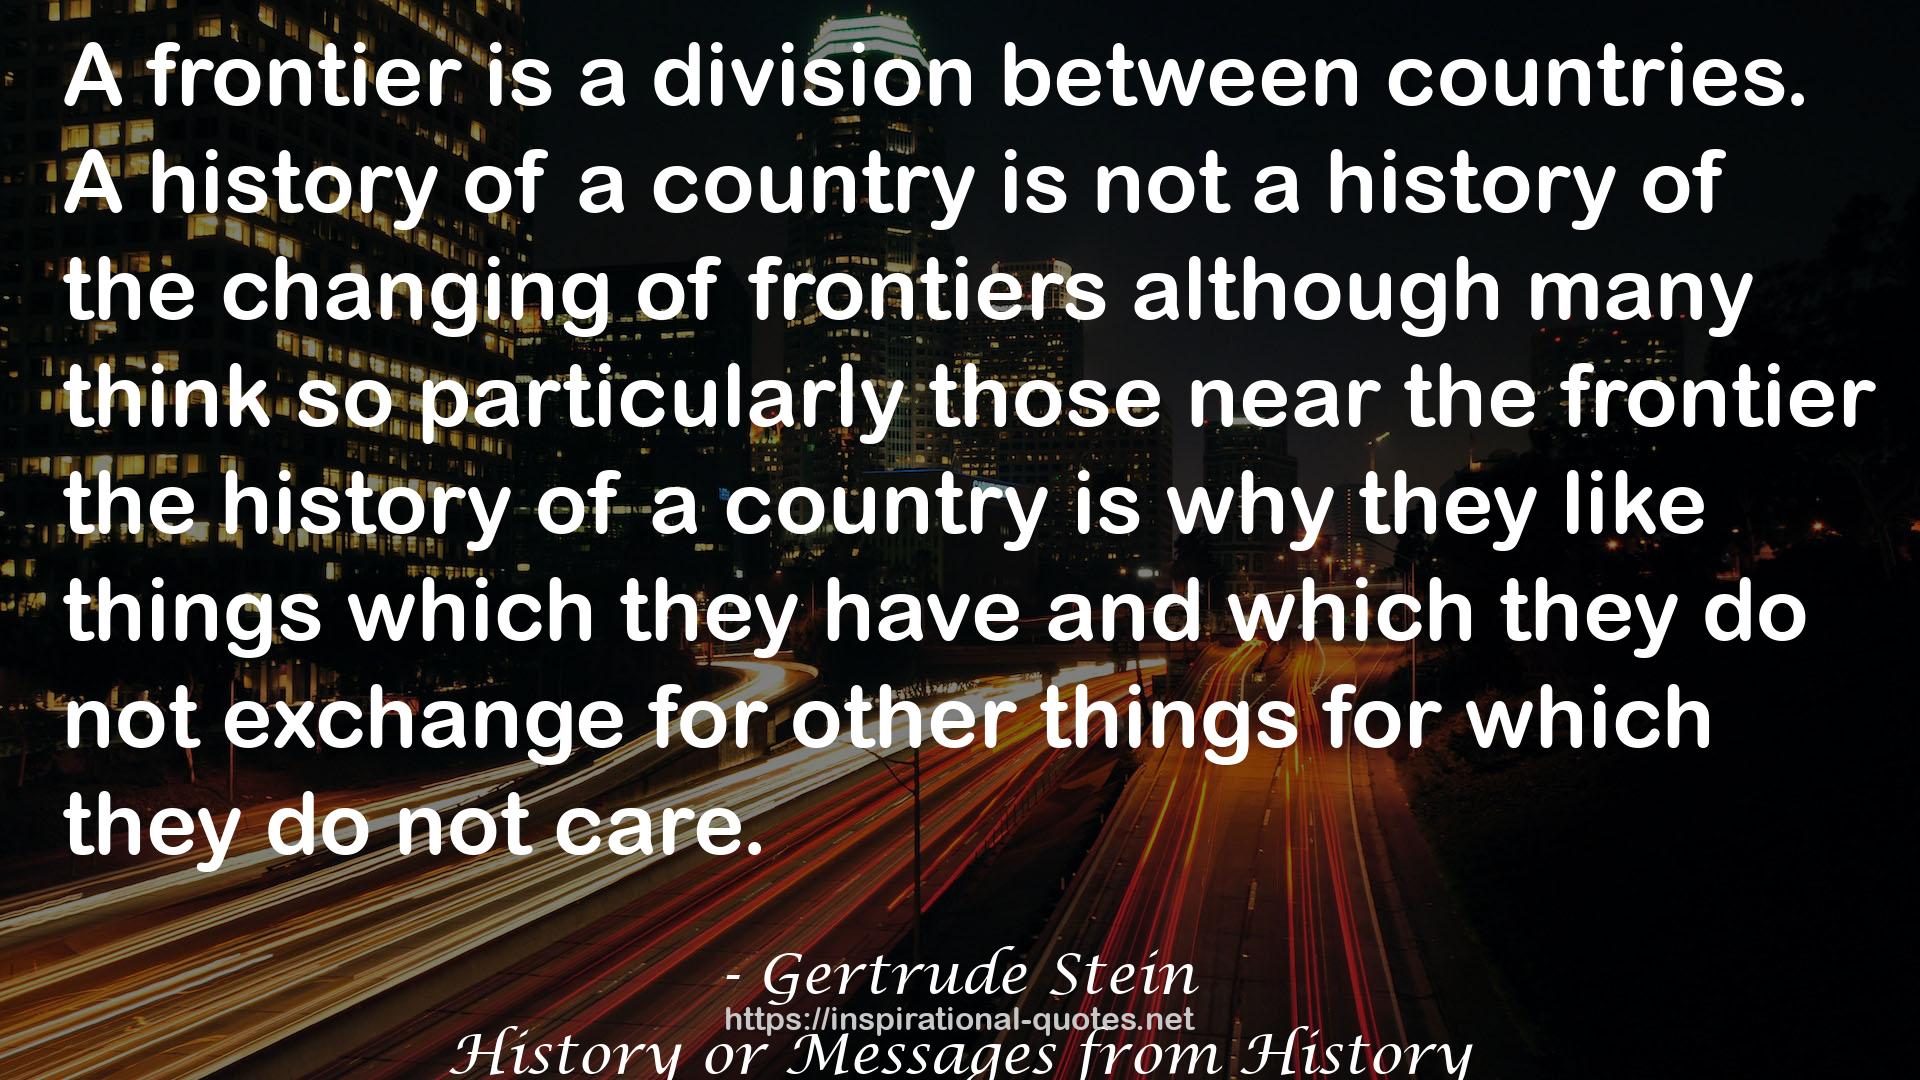 History or Messages from History QUOTES